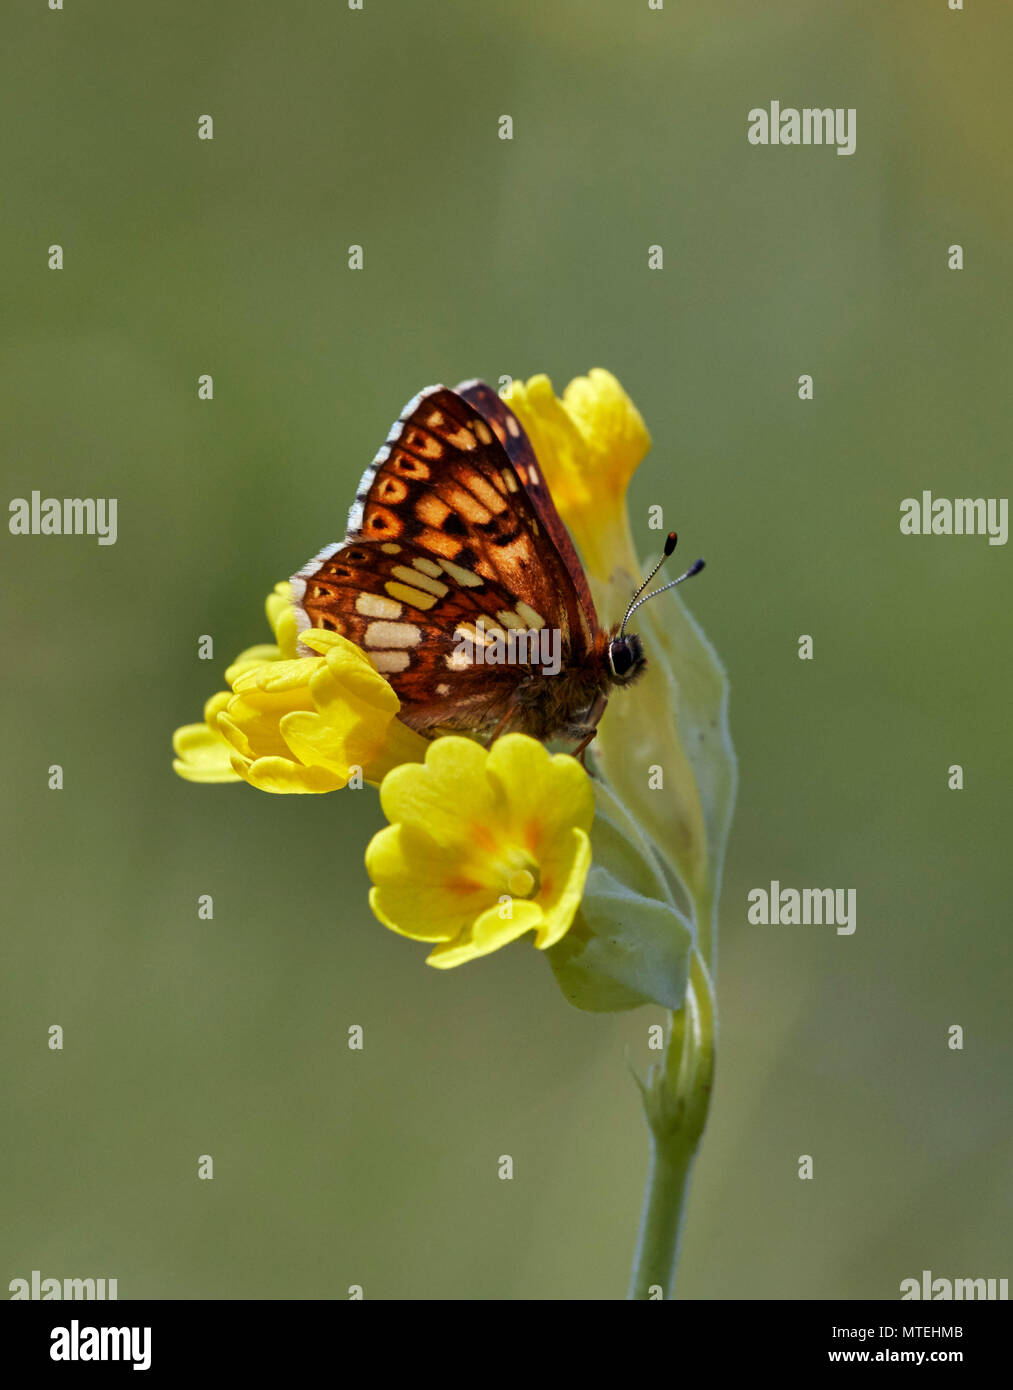 Duke of Burgundy butterfly on cowslip flowers. Noar Hill Nature Reserve, Selborne, Hampshire, England. Stock Photo